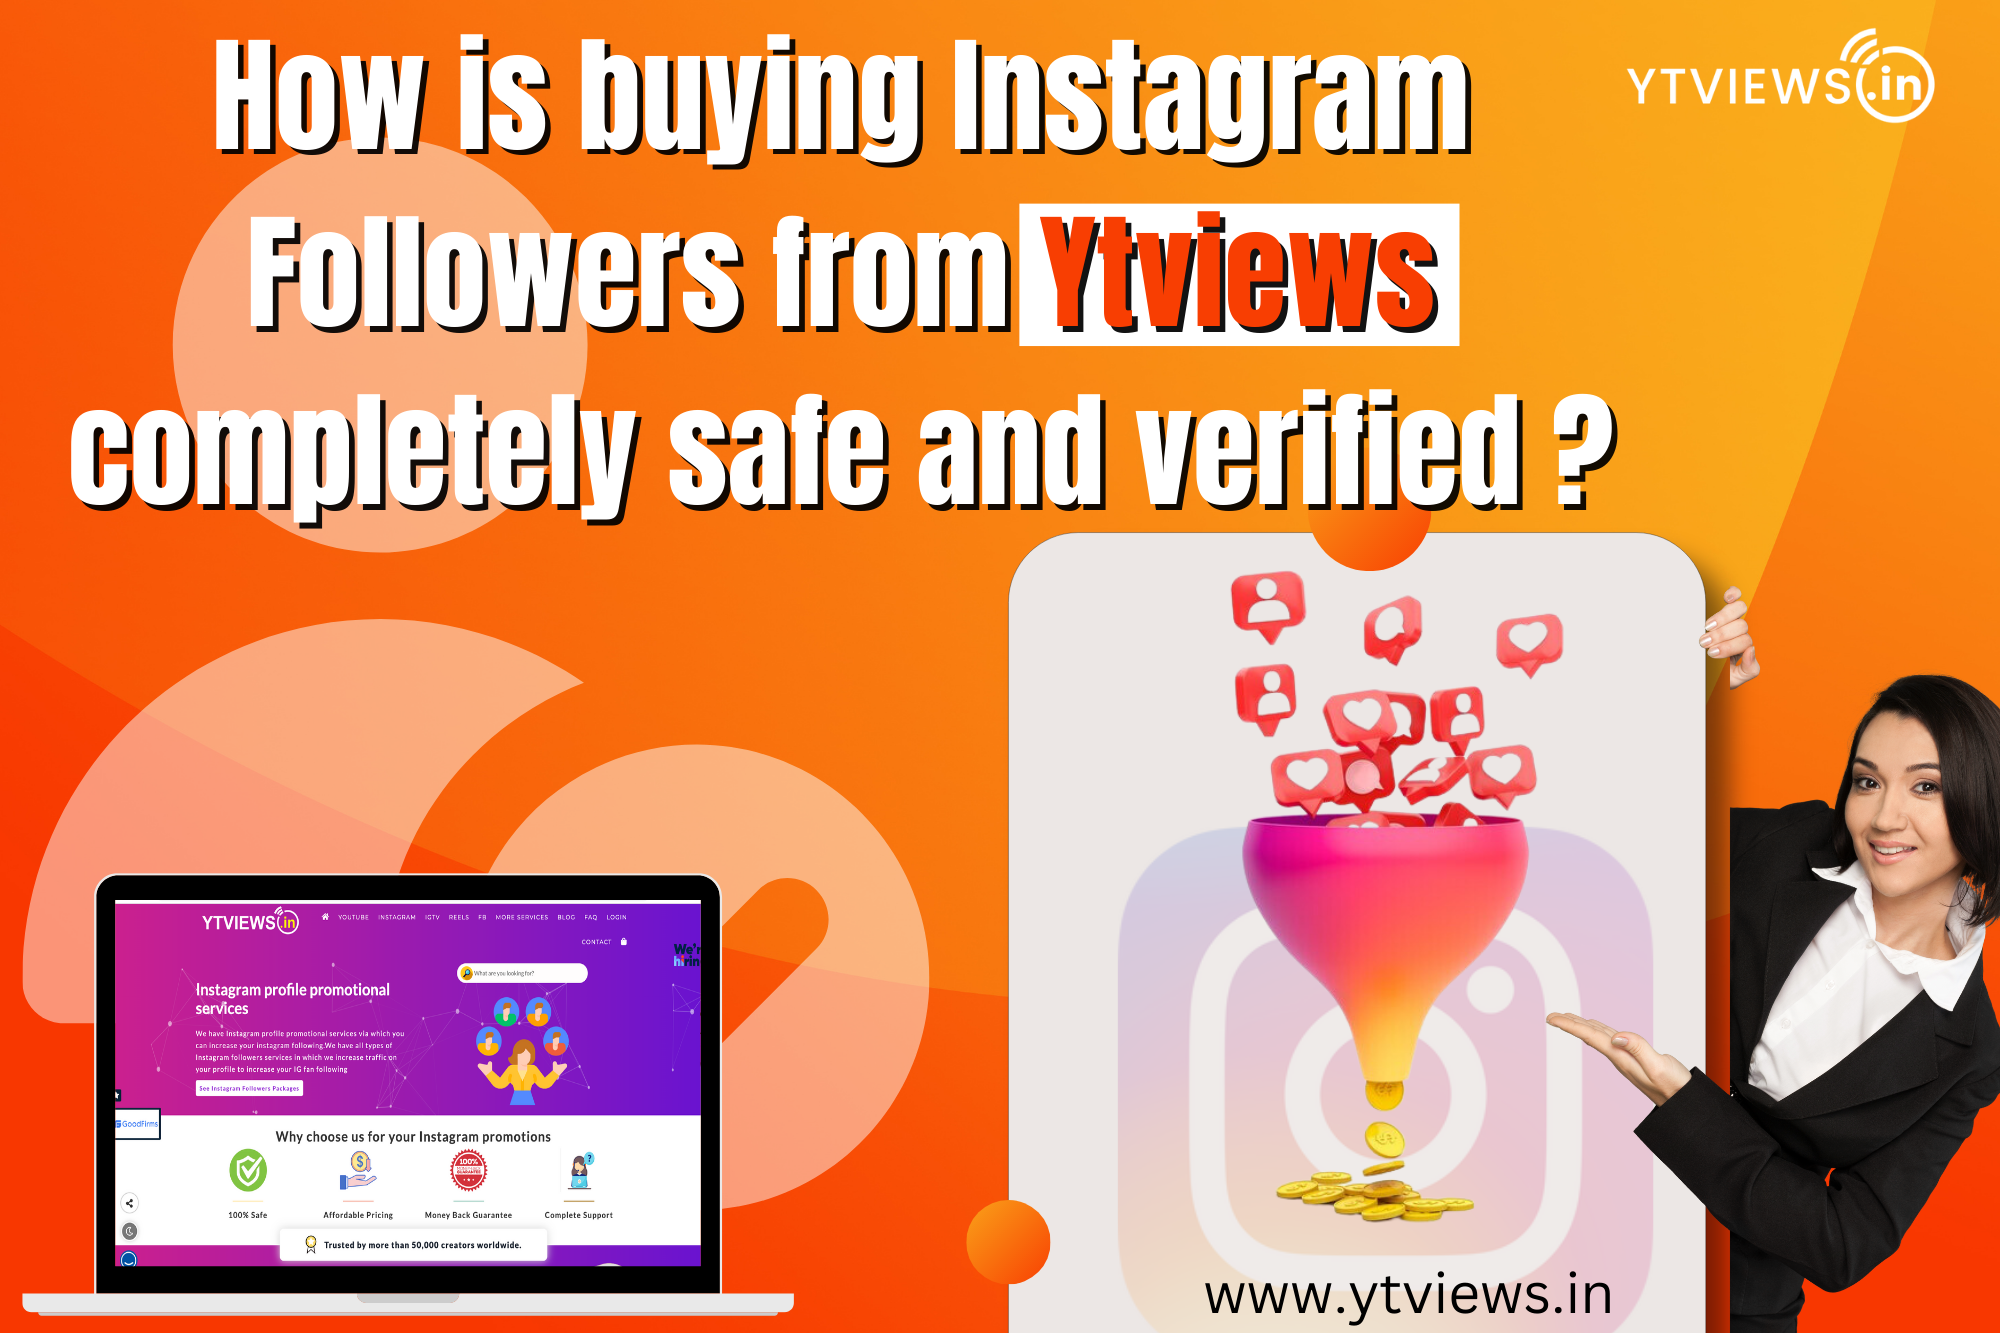 Does buying Instagram followers negatively affect your account in any manner?